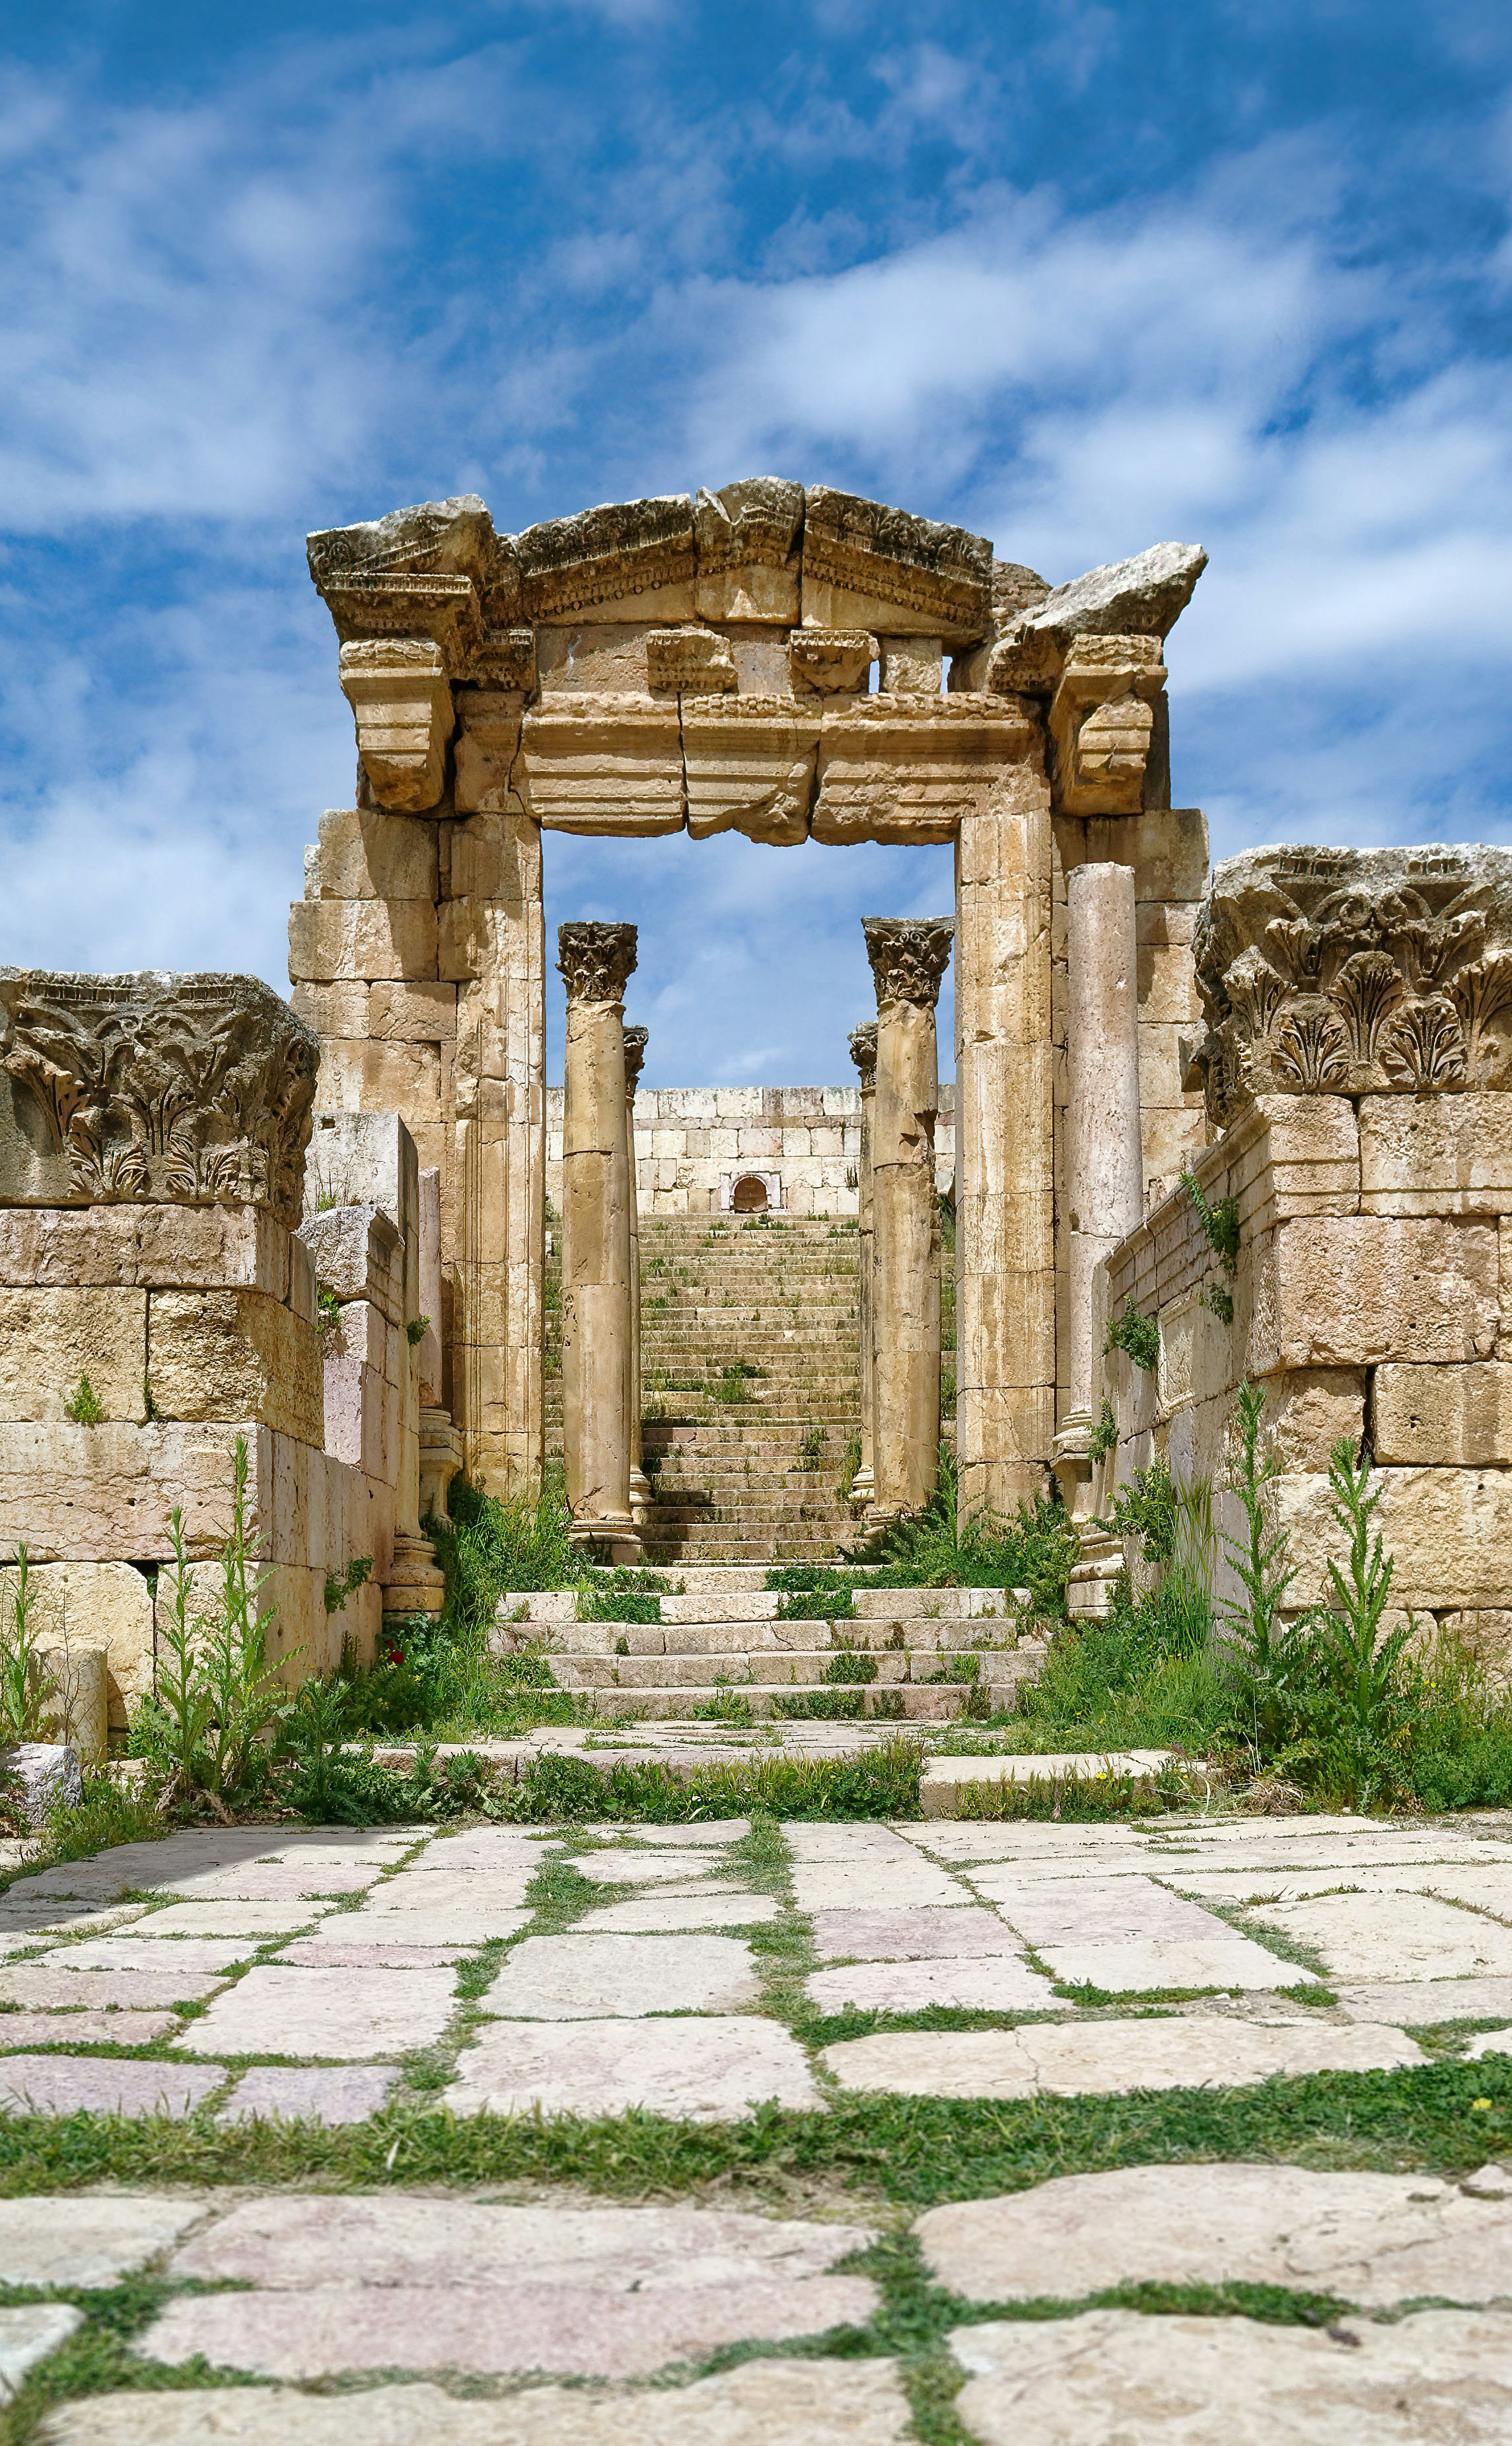 Entrance of a Roman temple in the ancient town of Gerasa, Jordan